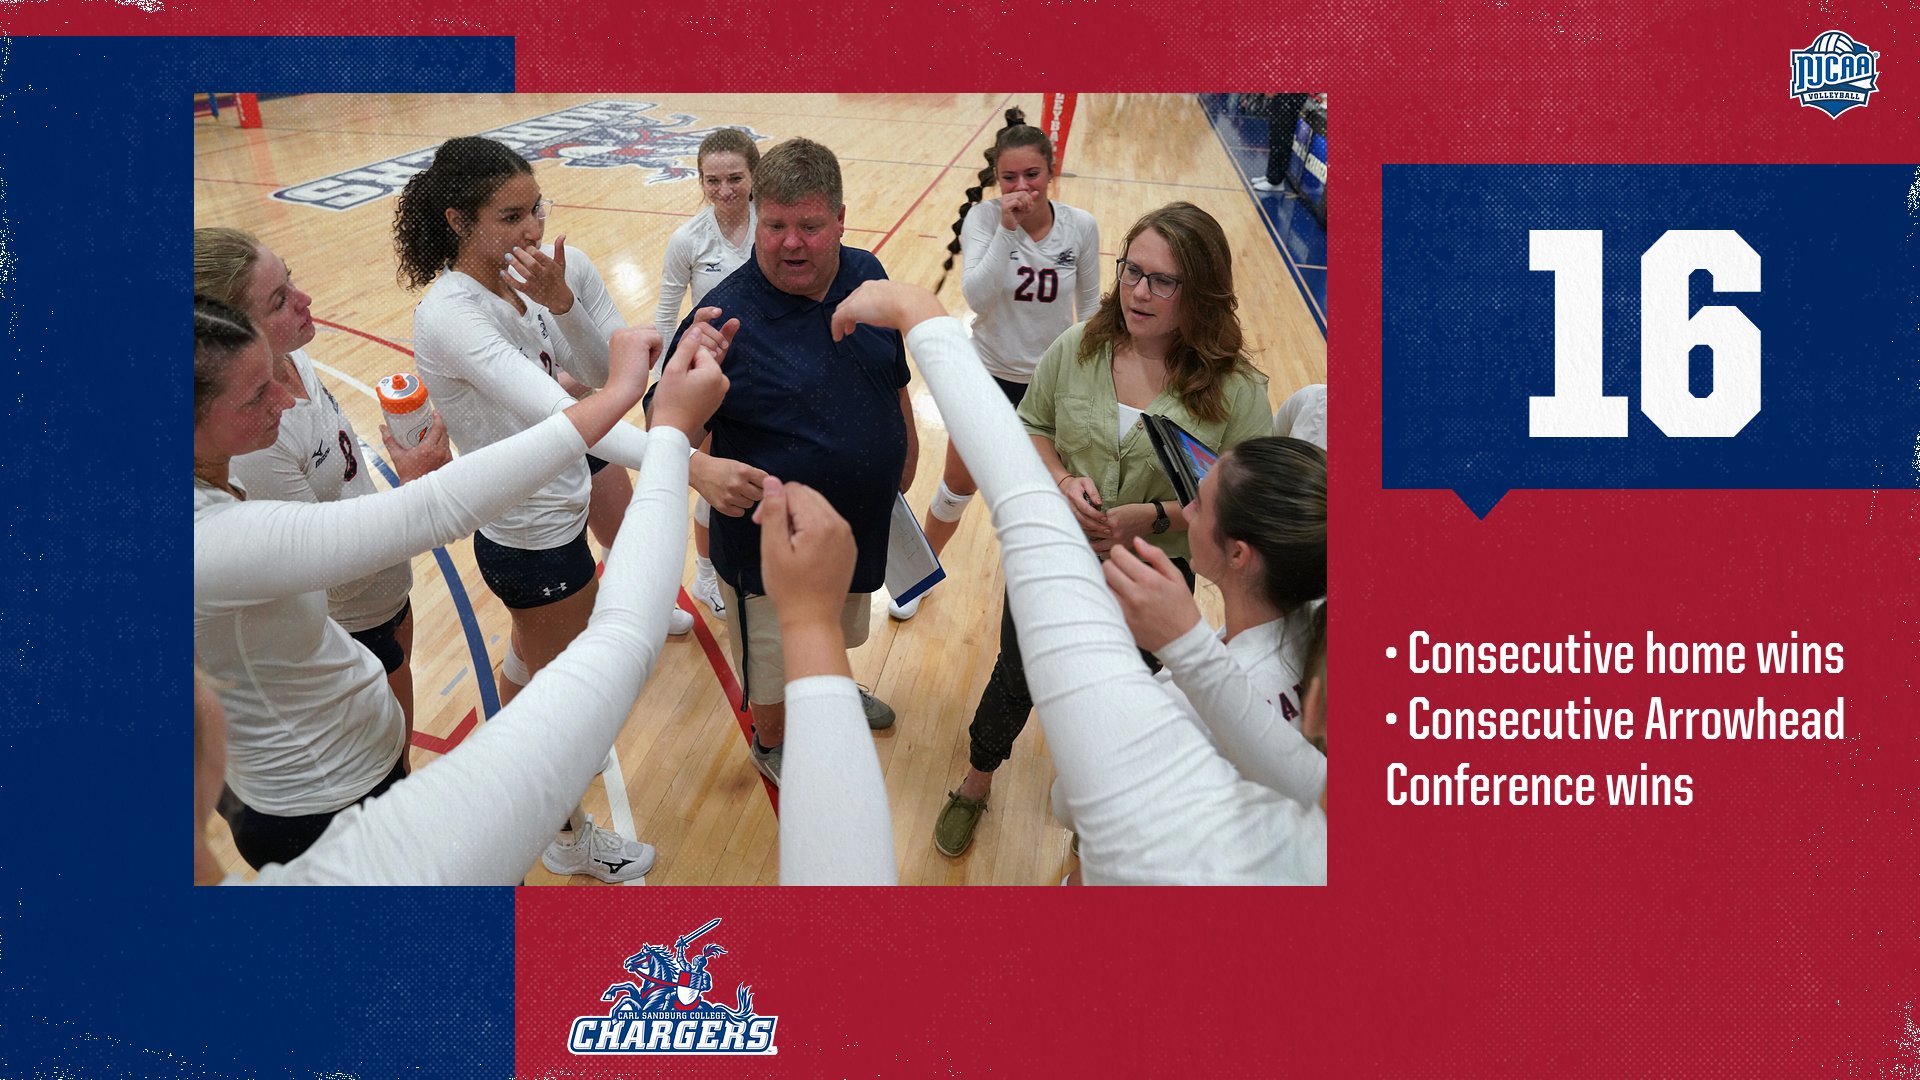 Chargers Cruise by Kishwaukee for 16th Straight Conference Win